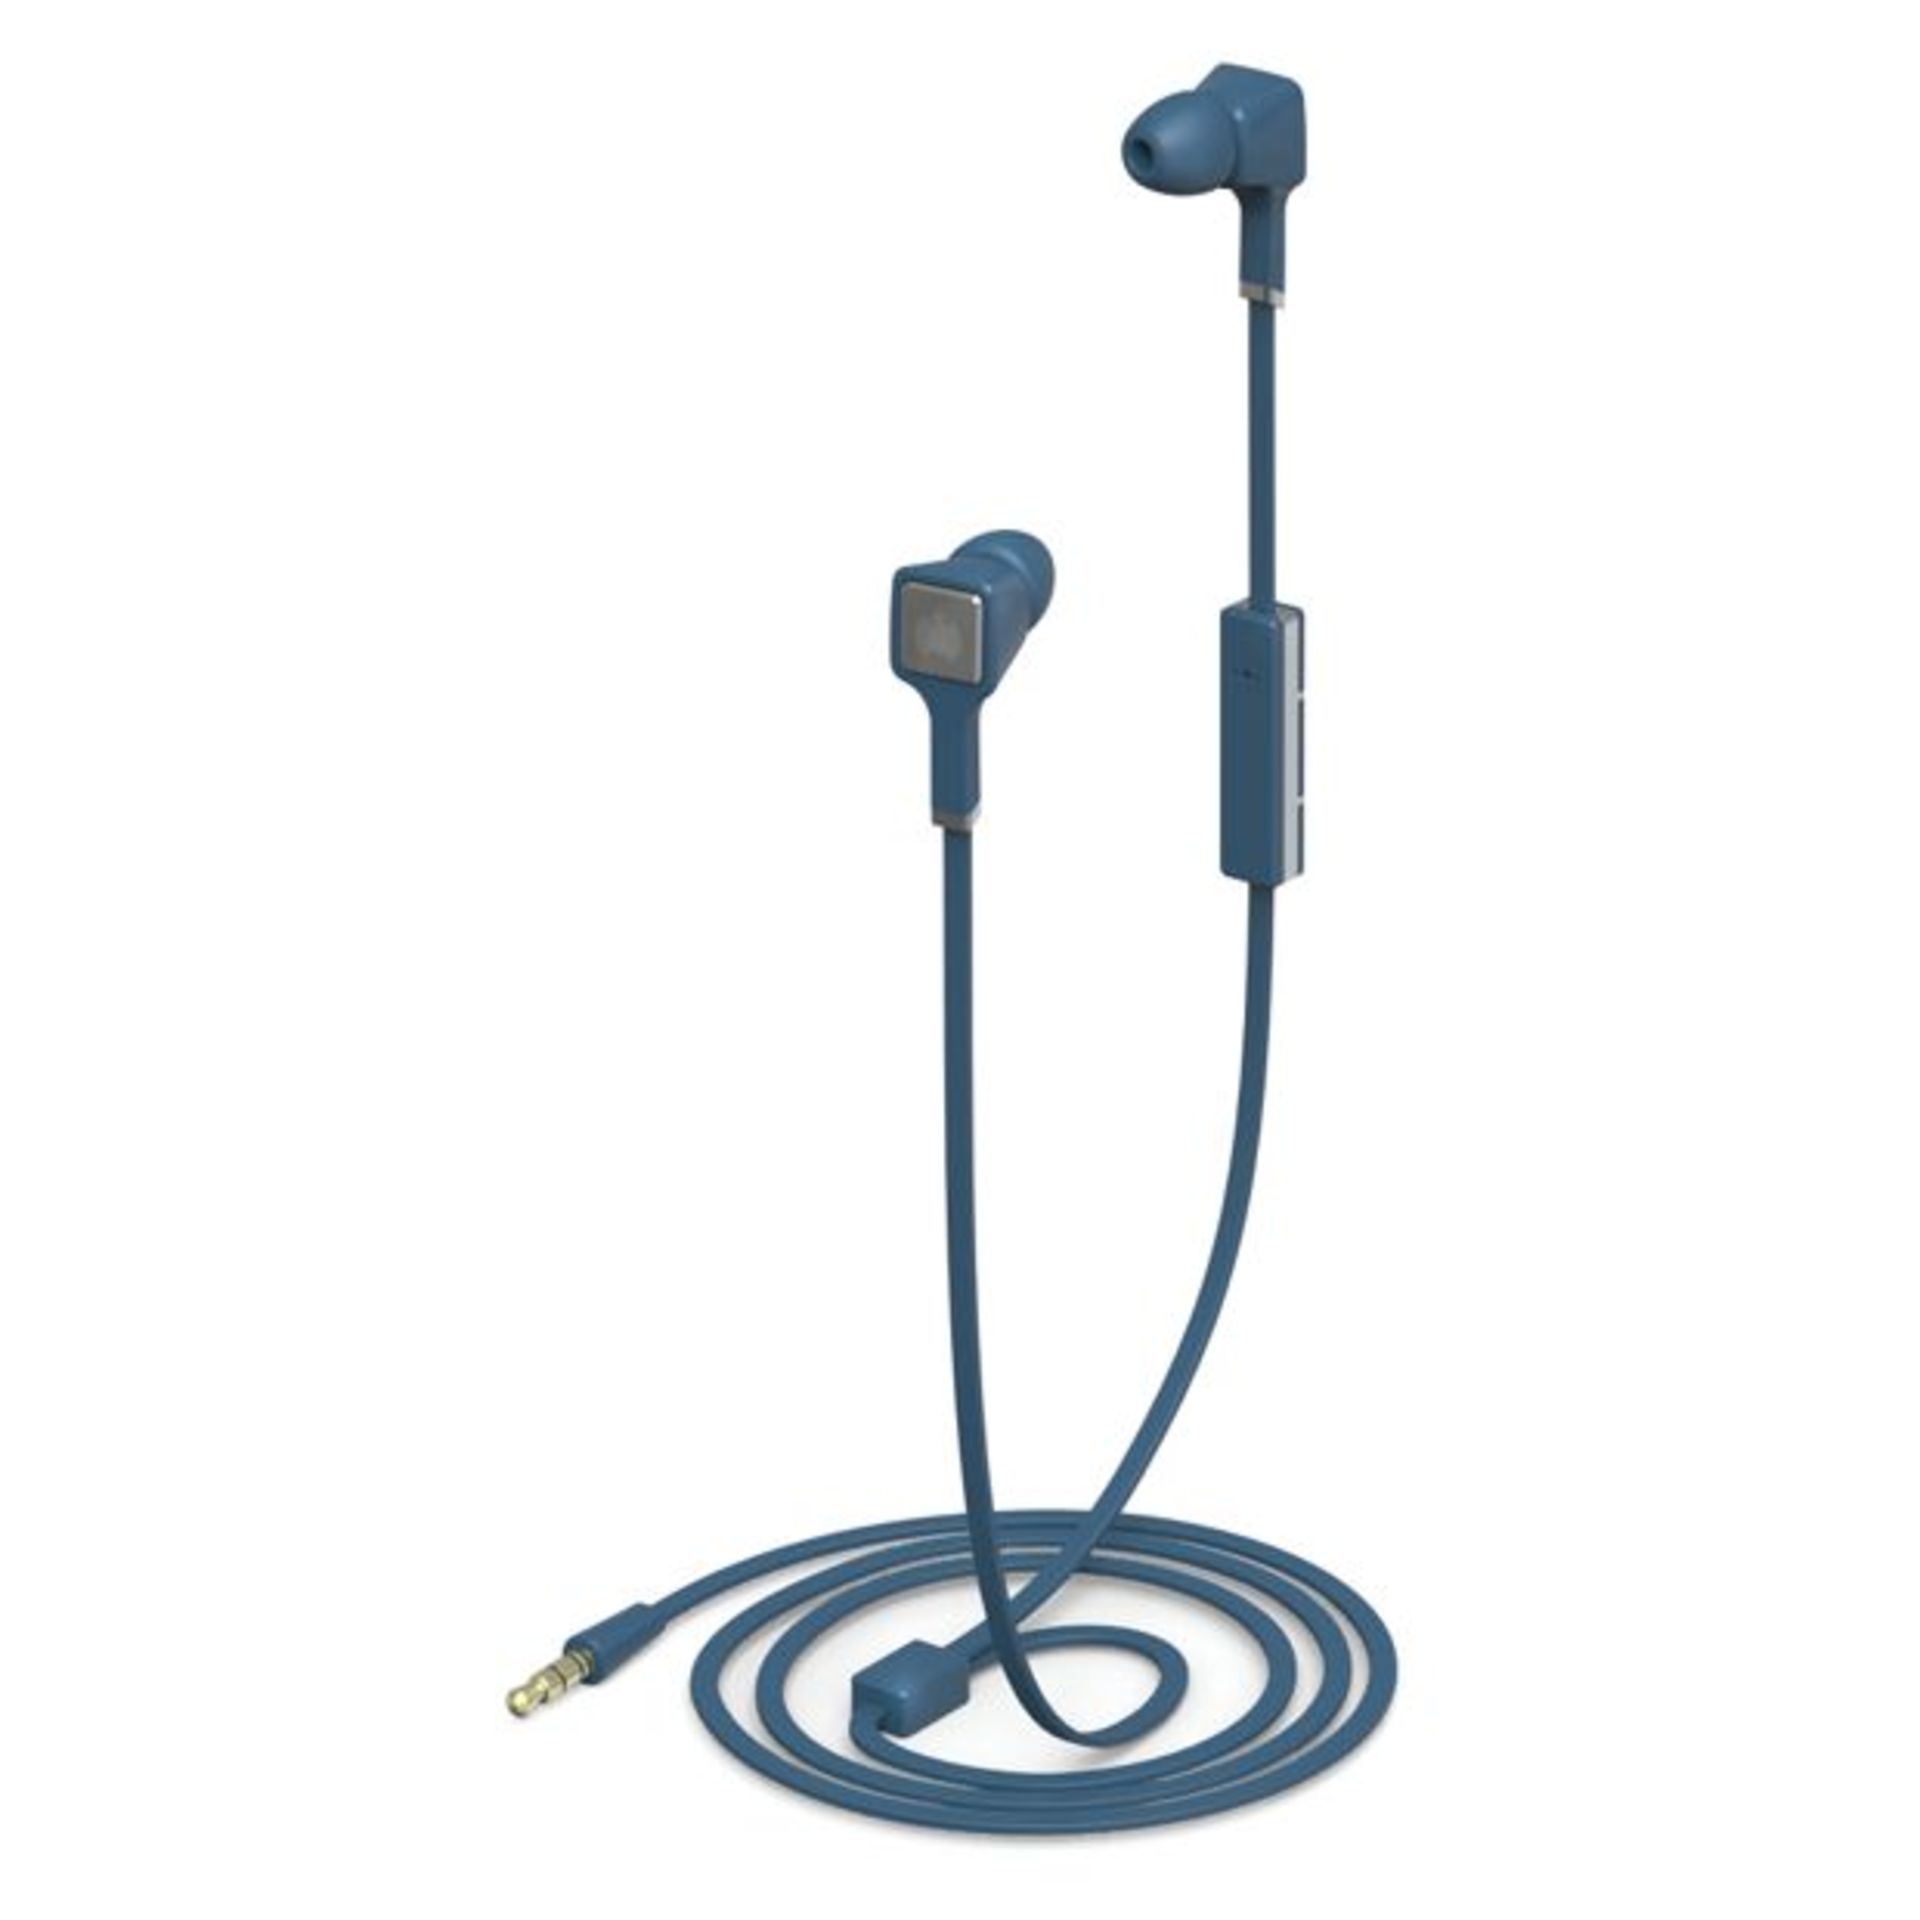 V *TRADE QTY* Brand New Ministry Of Sound Audio In - In Ear Headphones - Blue/Grey - RRP£39.99 X